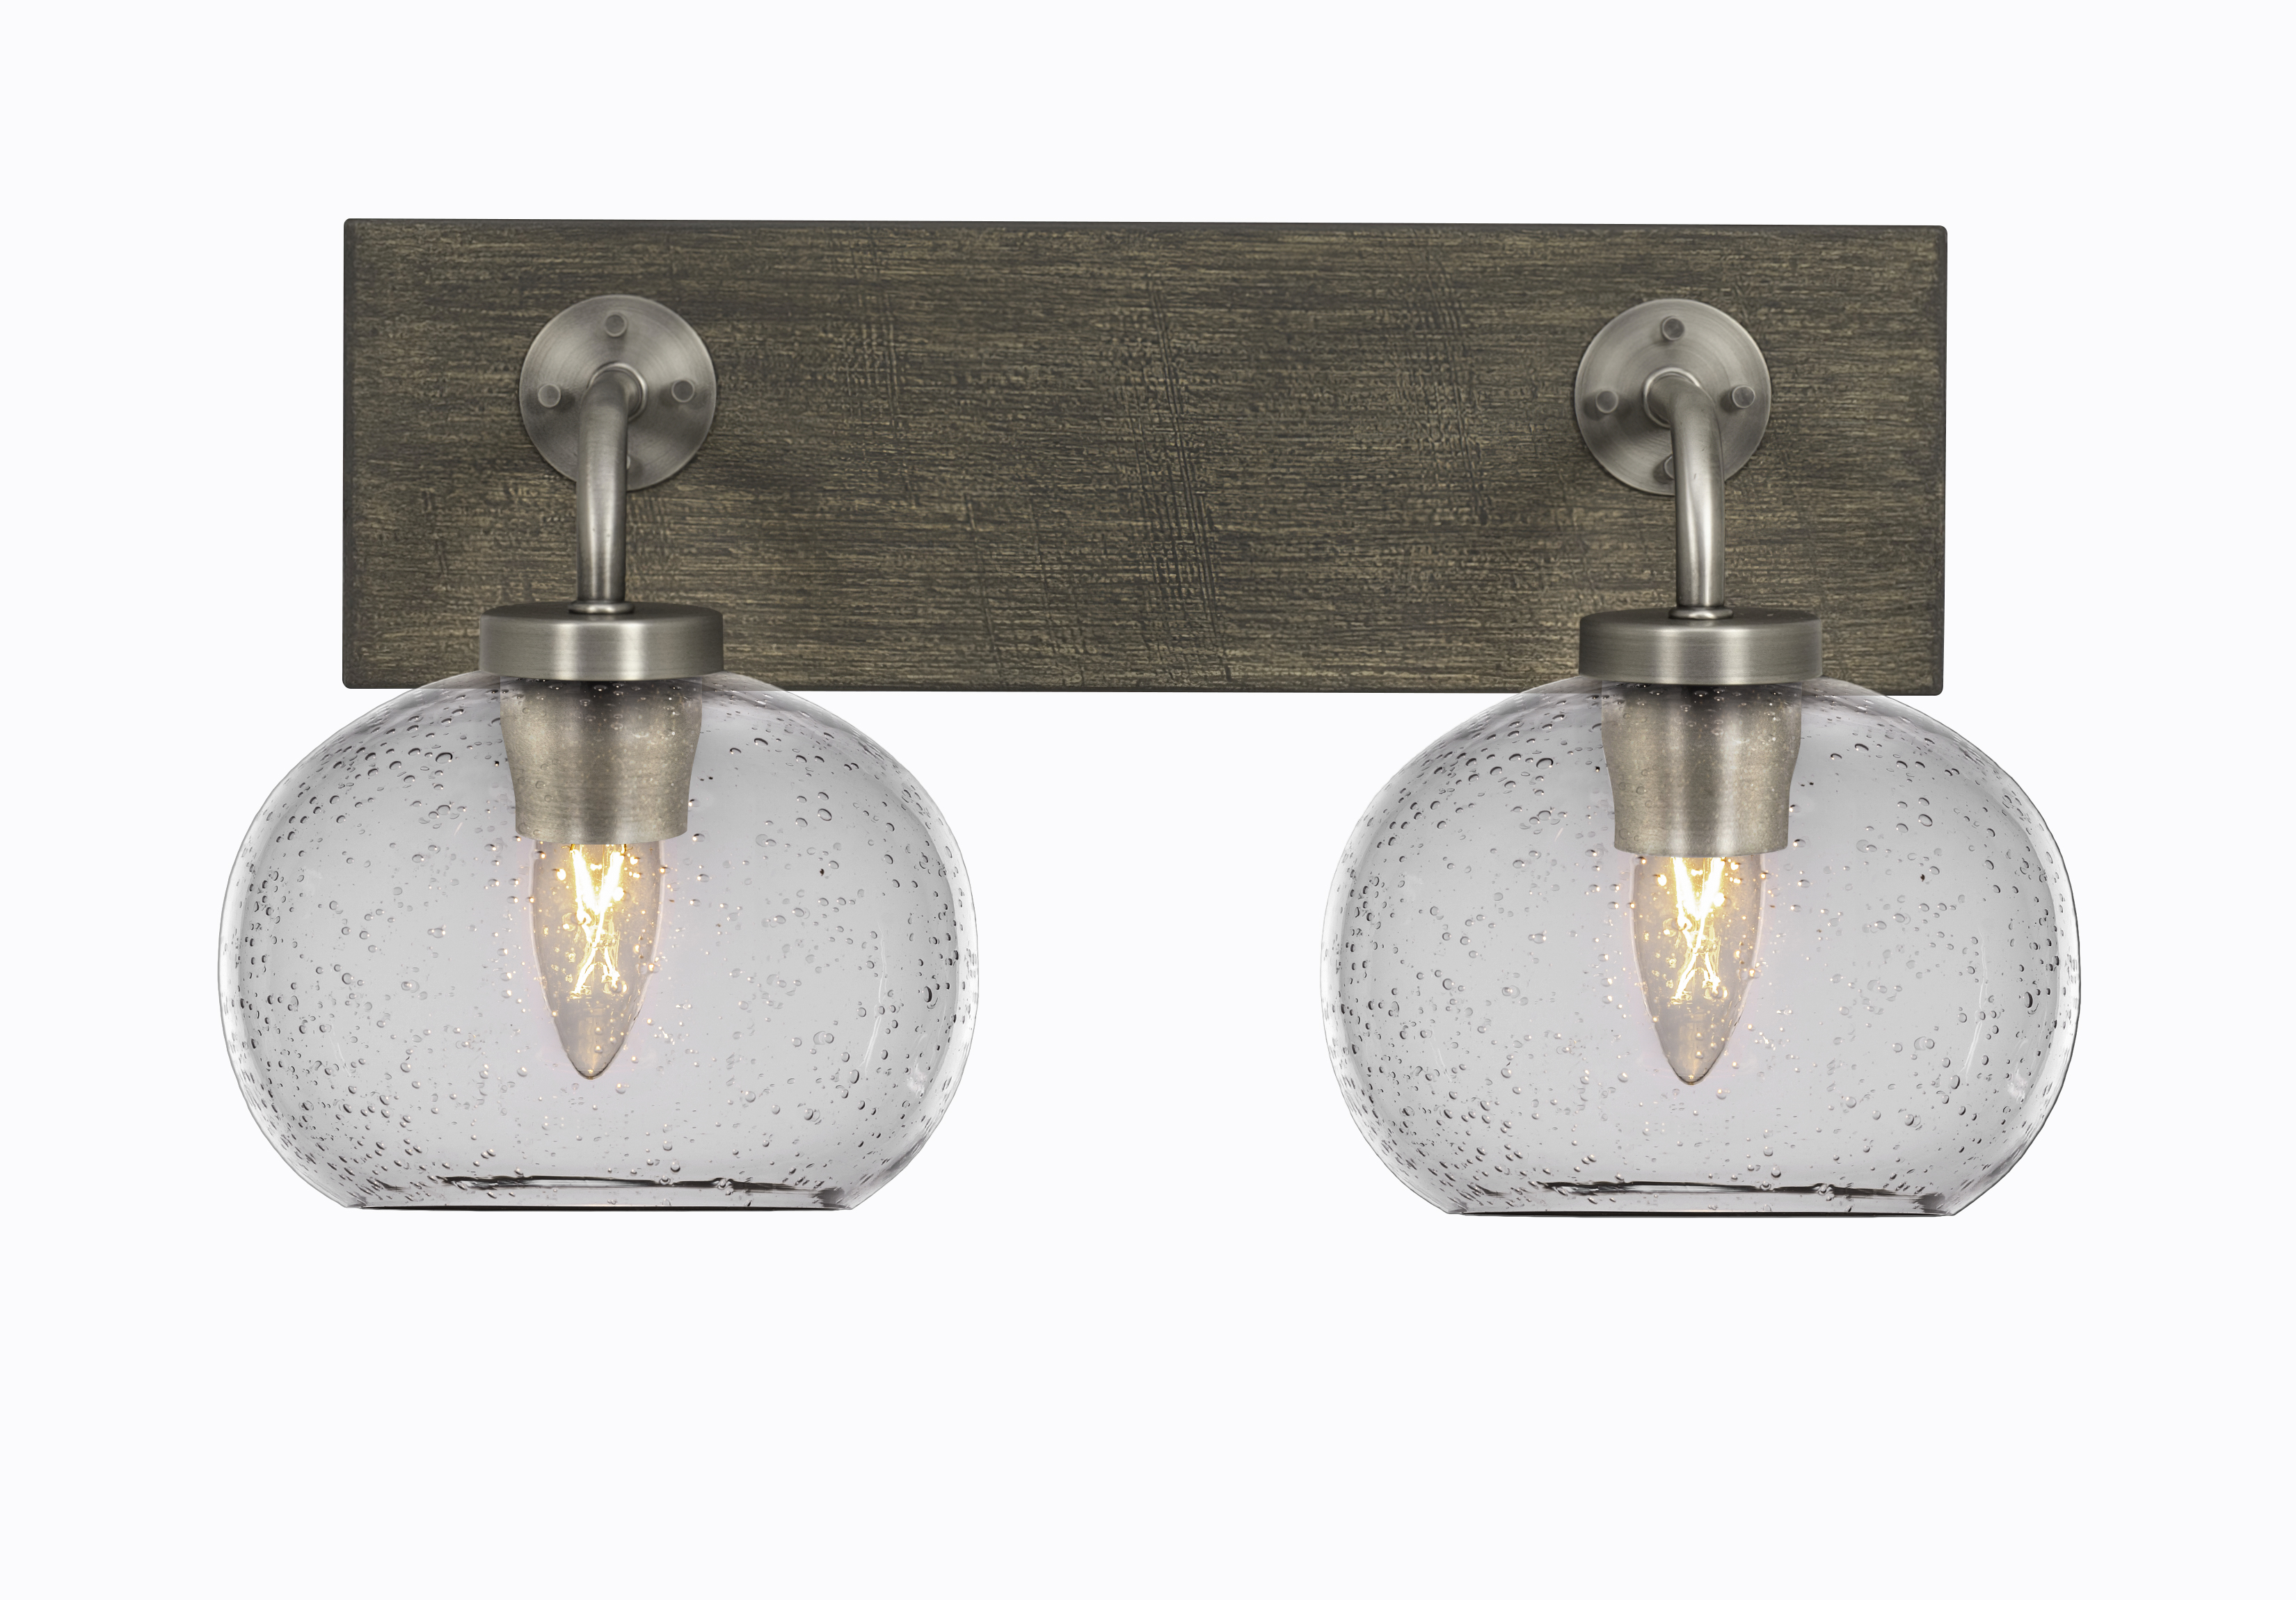 Toltec Lighting 1772-GPDW-202 Oxbridge 2 Light Bath Bar In Graphite & Painted Distressed Wood-look Metal Finish With 7" Clear Bubble Glass